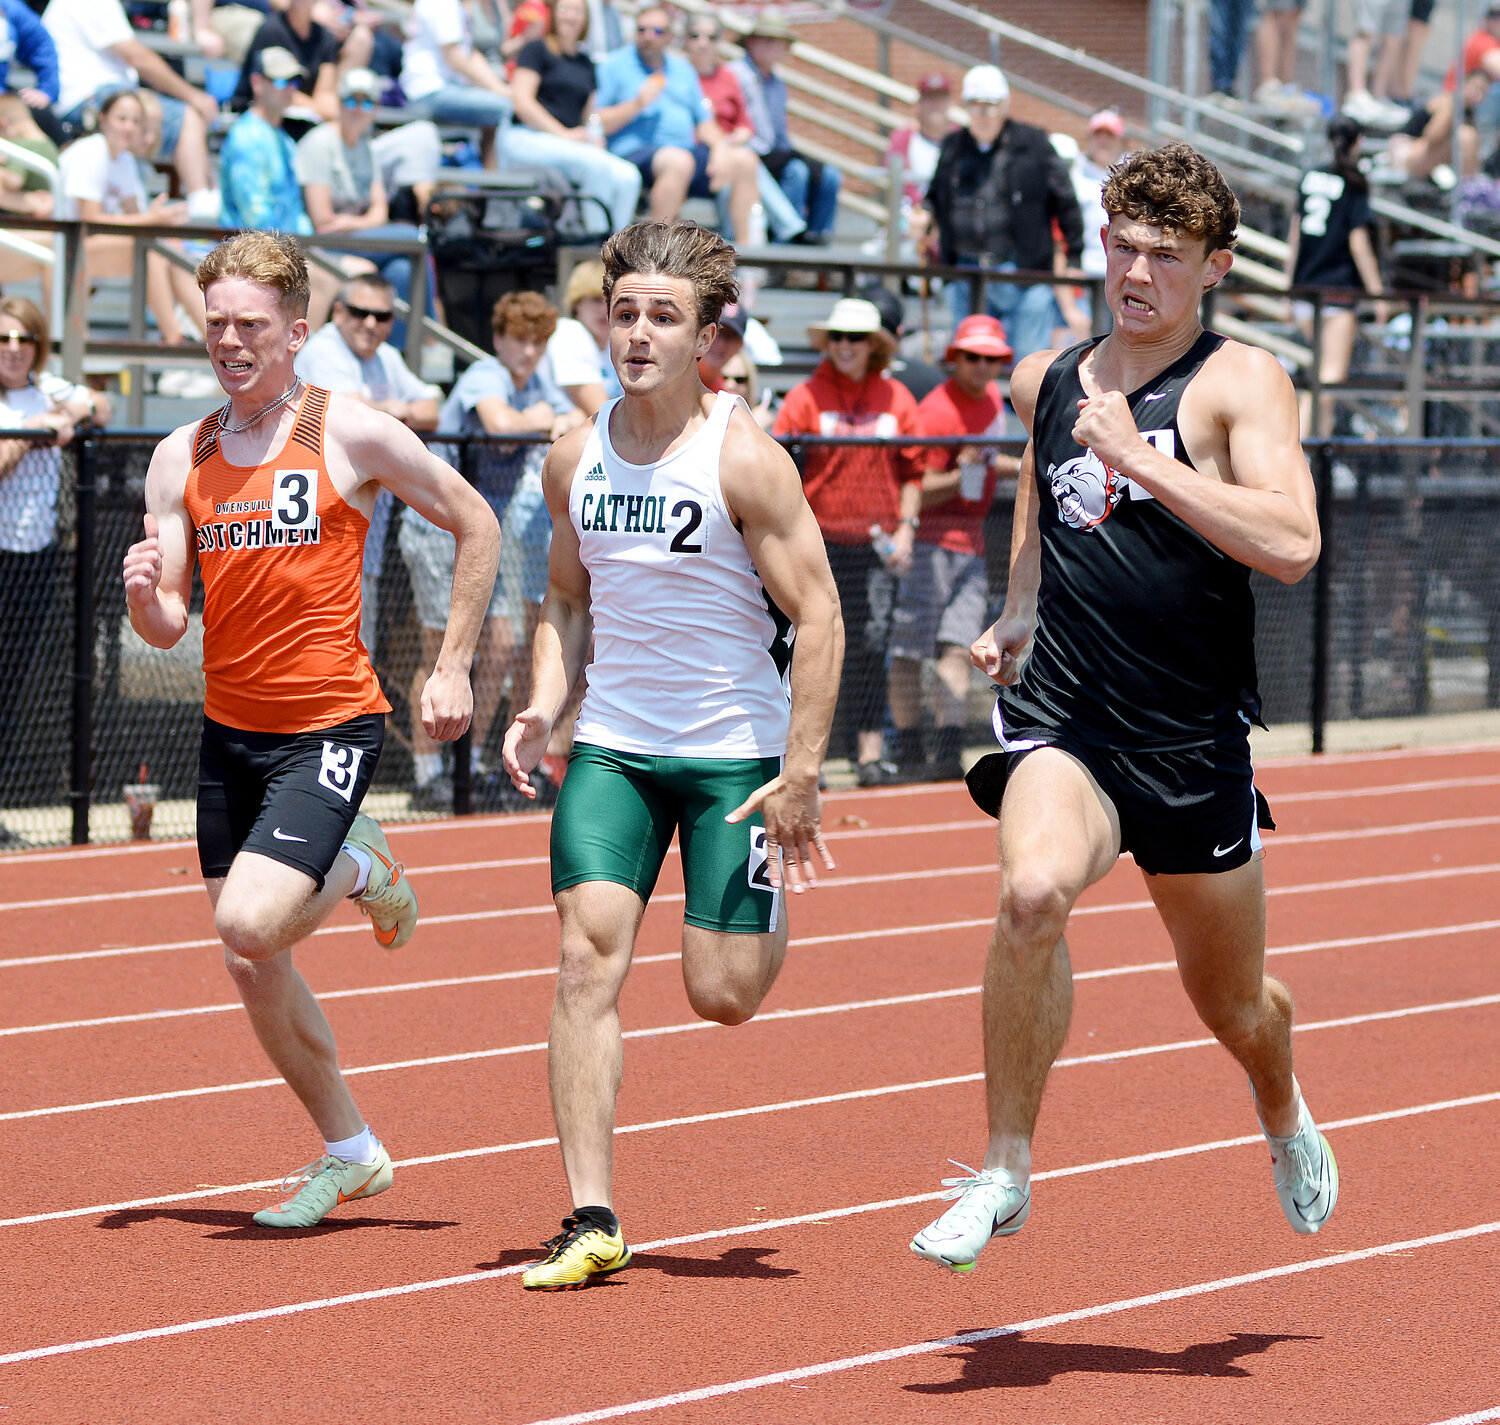 Charlie Whelan (far left) sprints towards the finish line in the boys 100m dash. Whelan placed fifth in the event before bouncing back to qualify for state in the boys 200m dash after a fourth-place finish.